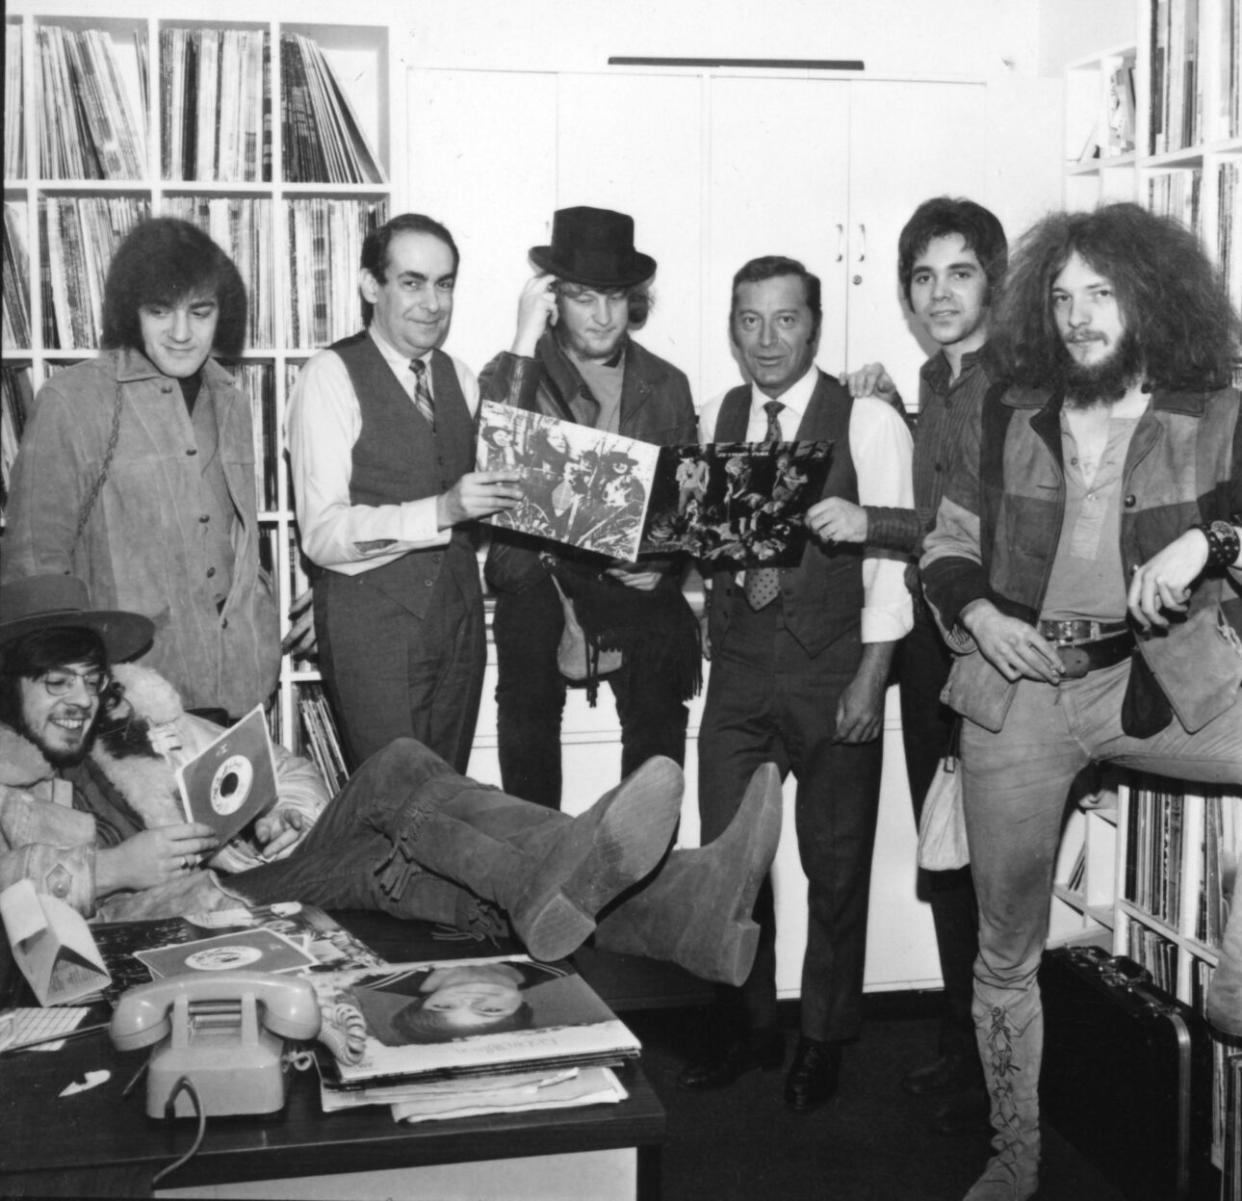 Jethro Tull pose with their album ‘This Was’ and record label executives in 1968 in New York. (Credit: PoPsie Randolph/Michael Ochs Archives/Getty Images)